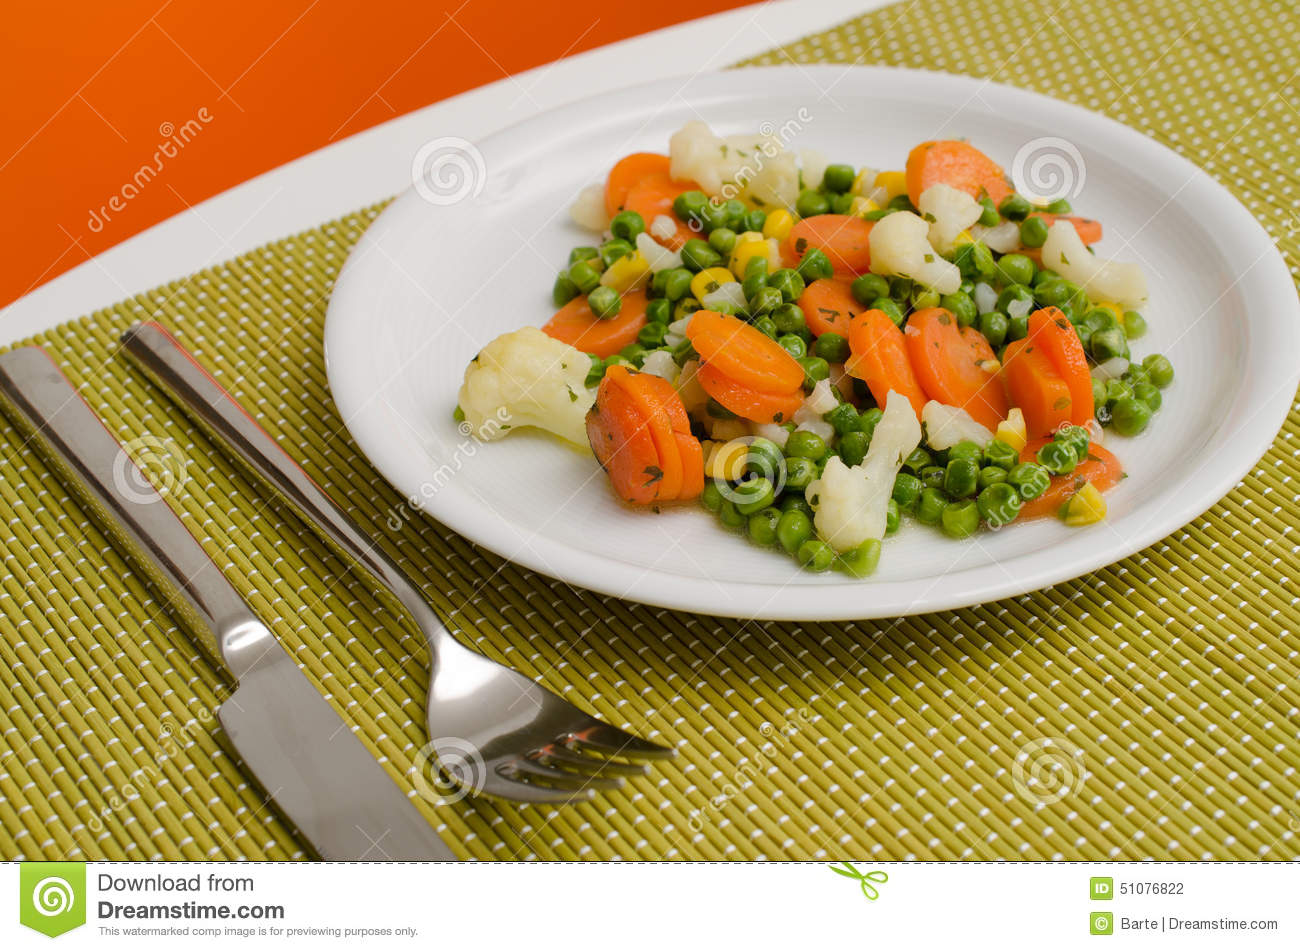 Cooked Vegetables Stock Photo   Image  51076822